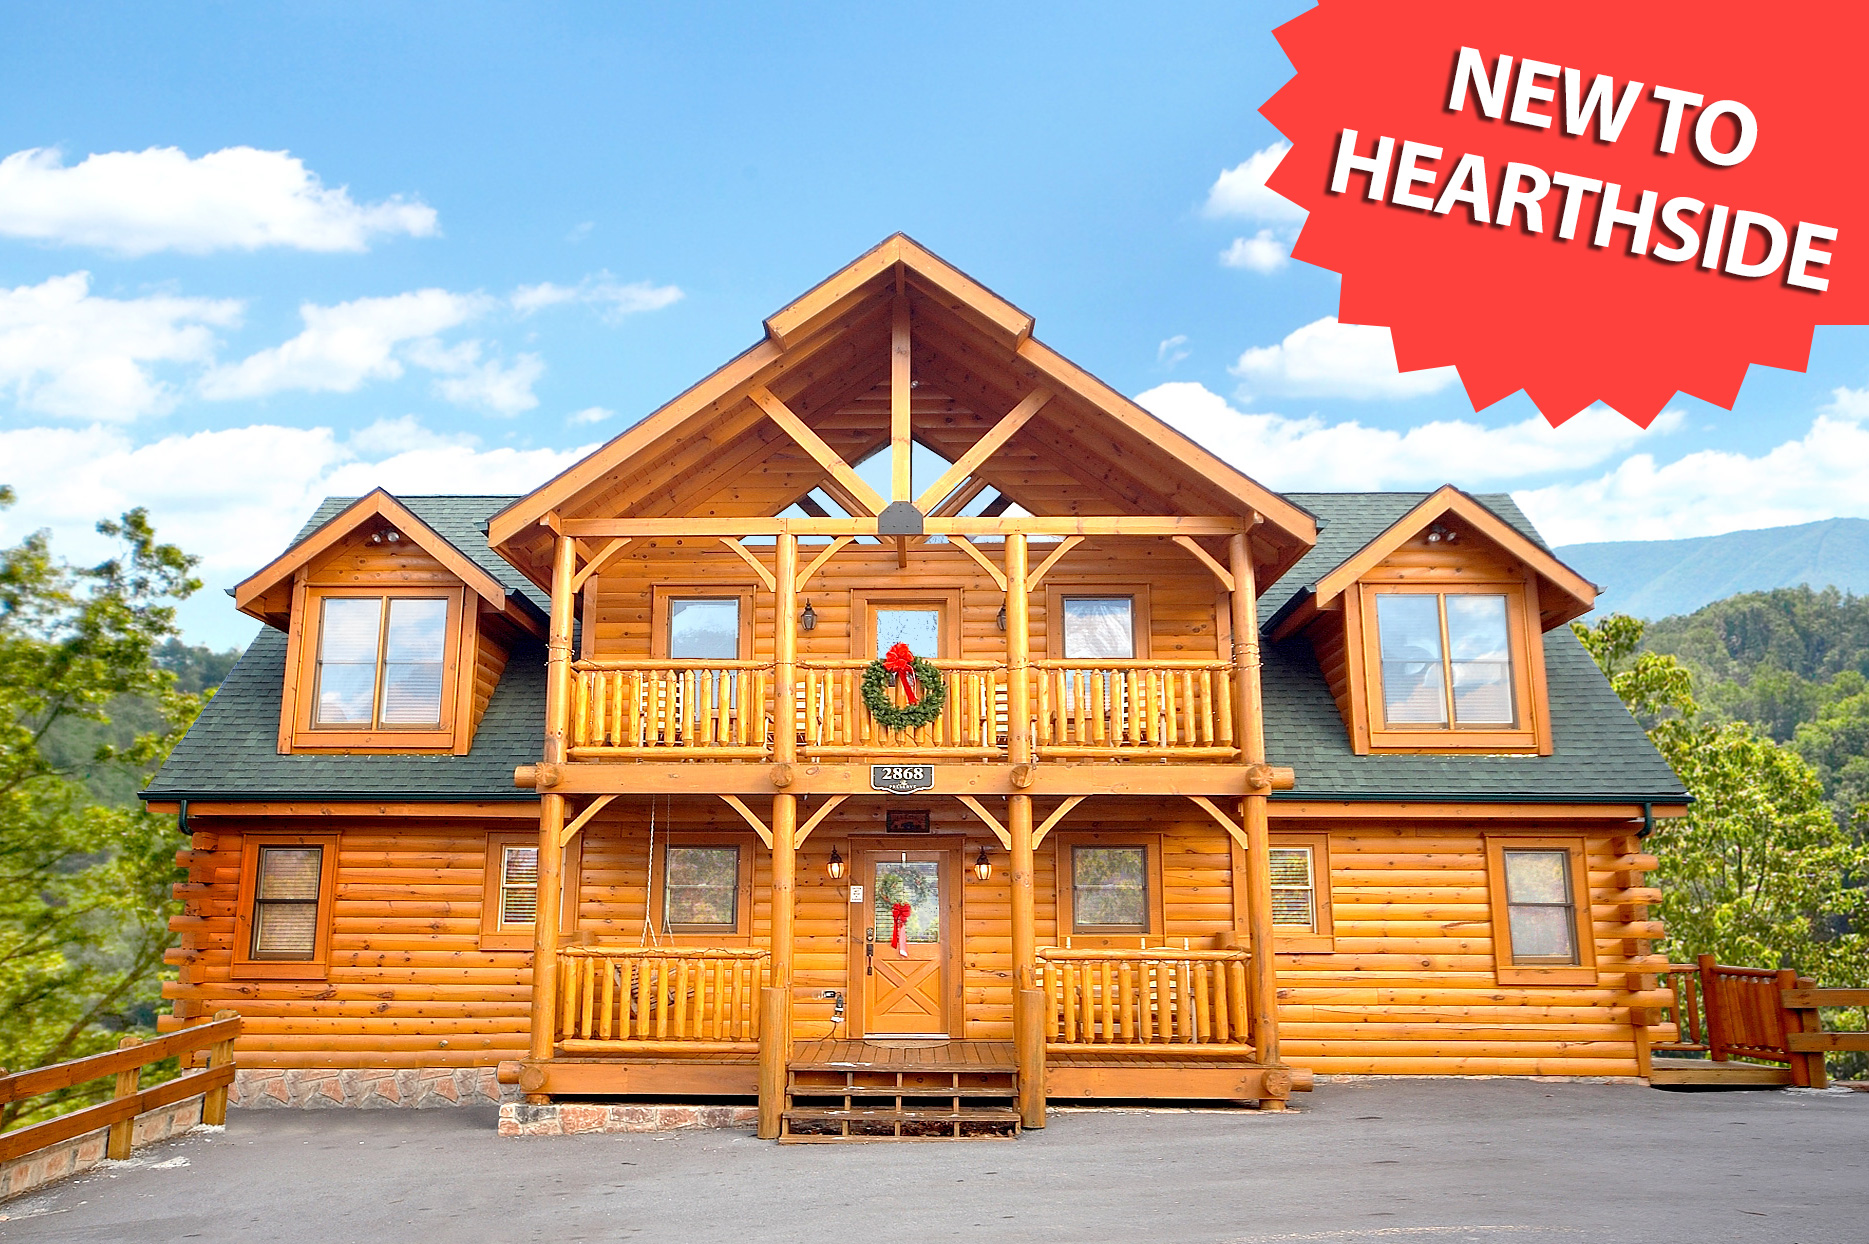 BEAR TRAIL LODGE - 5 BEDROOM cabin located in .